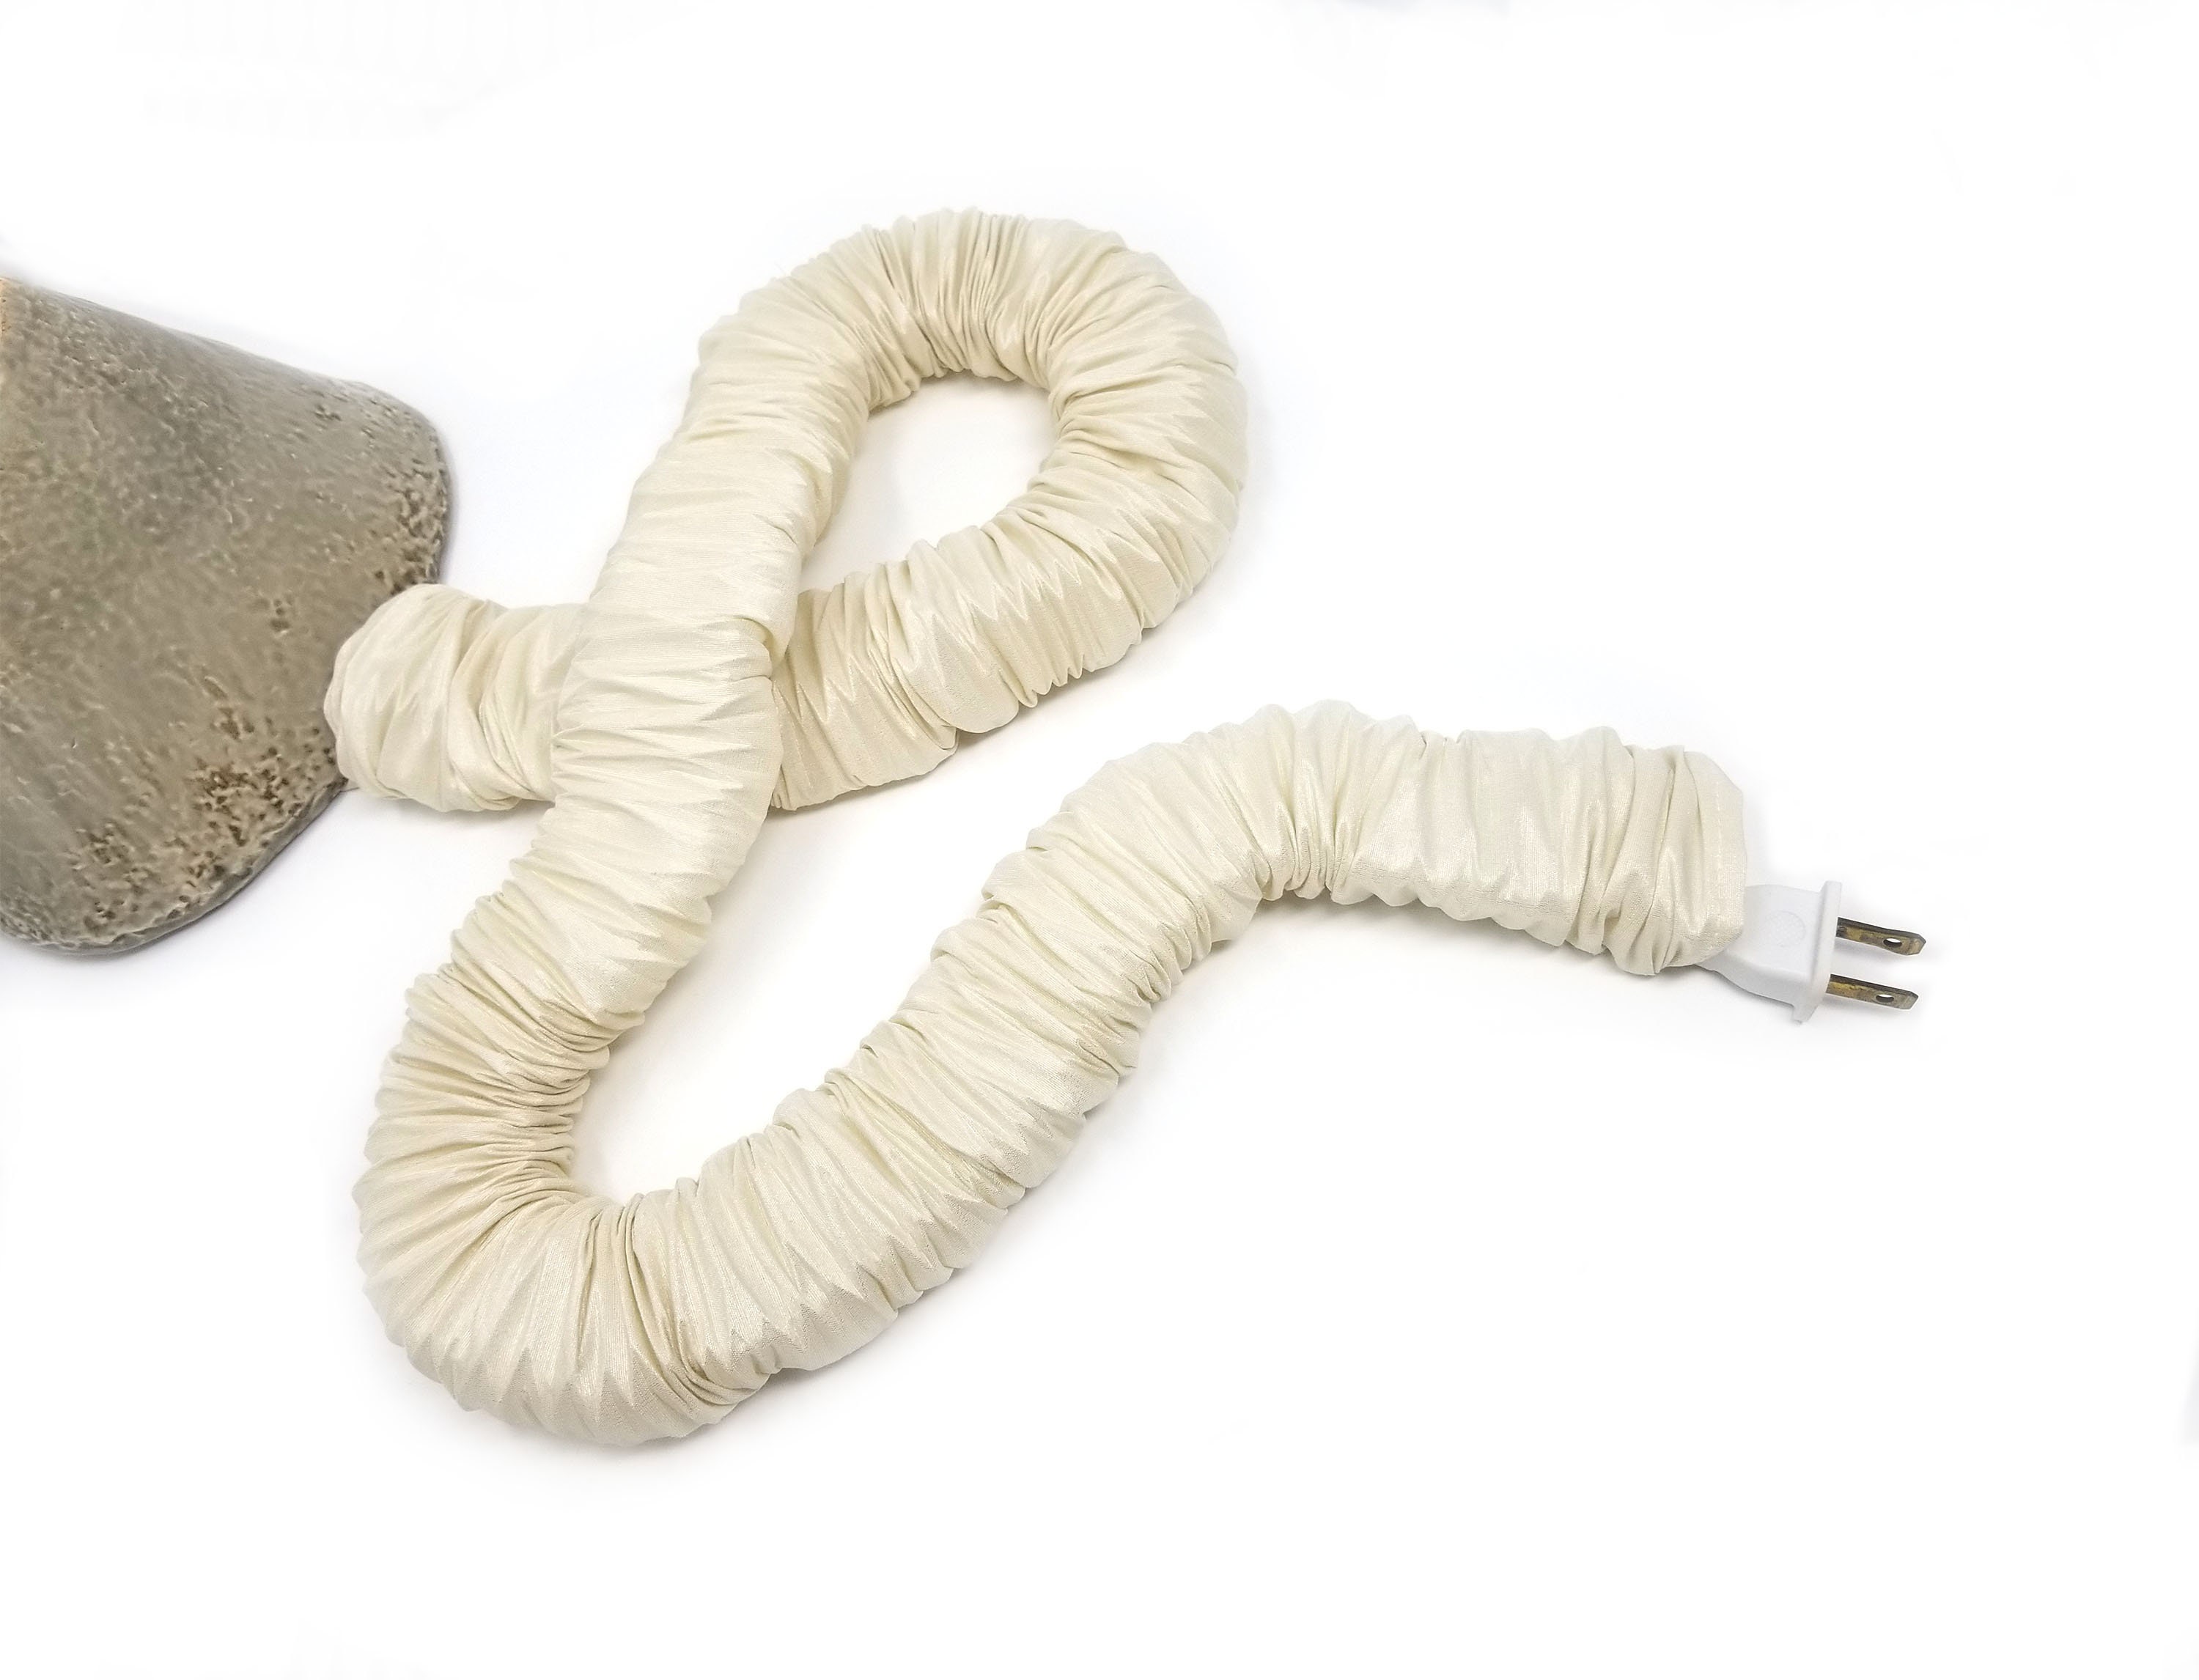 Taupe 9 Ft X 2 Inlamp Cord Cover, Fabric Cord Cover, Cord Sleeve